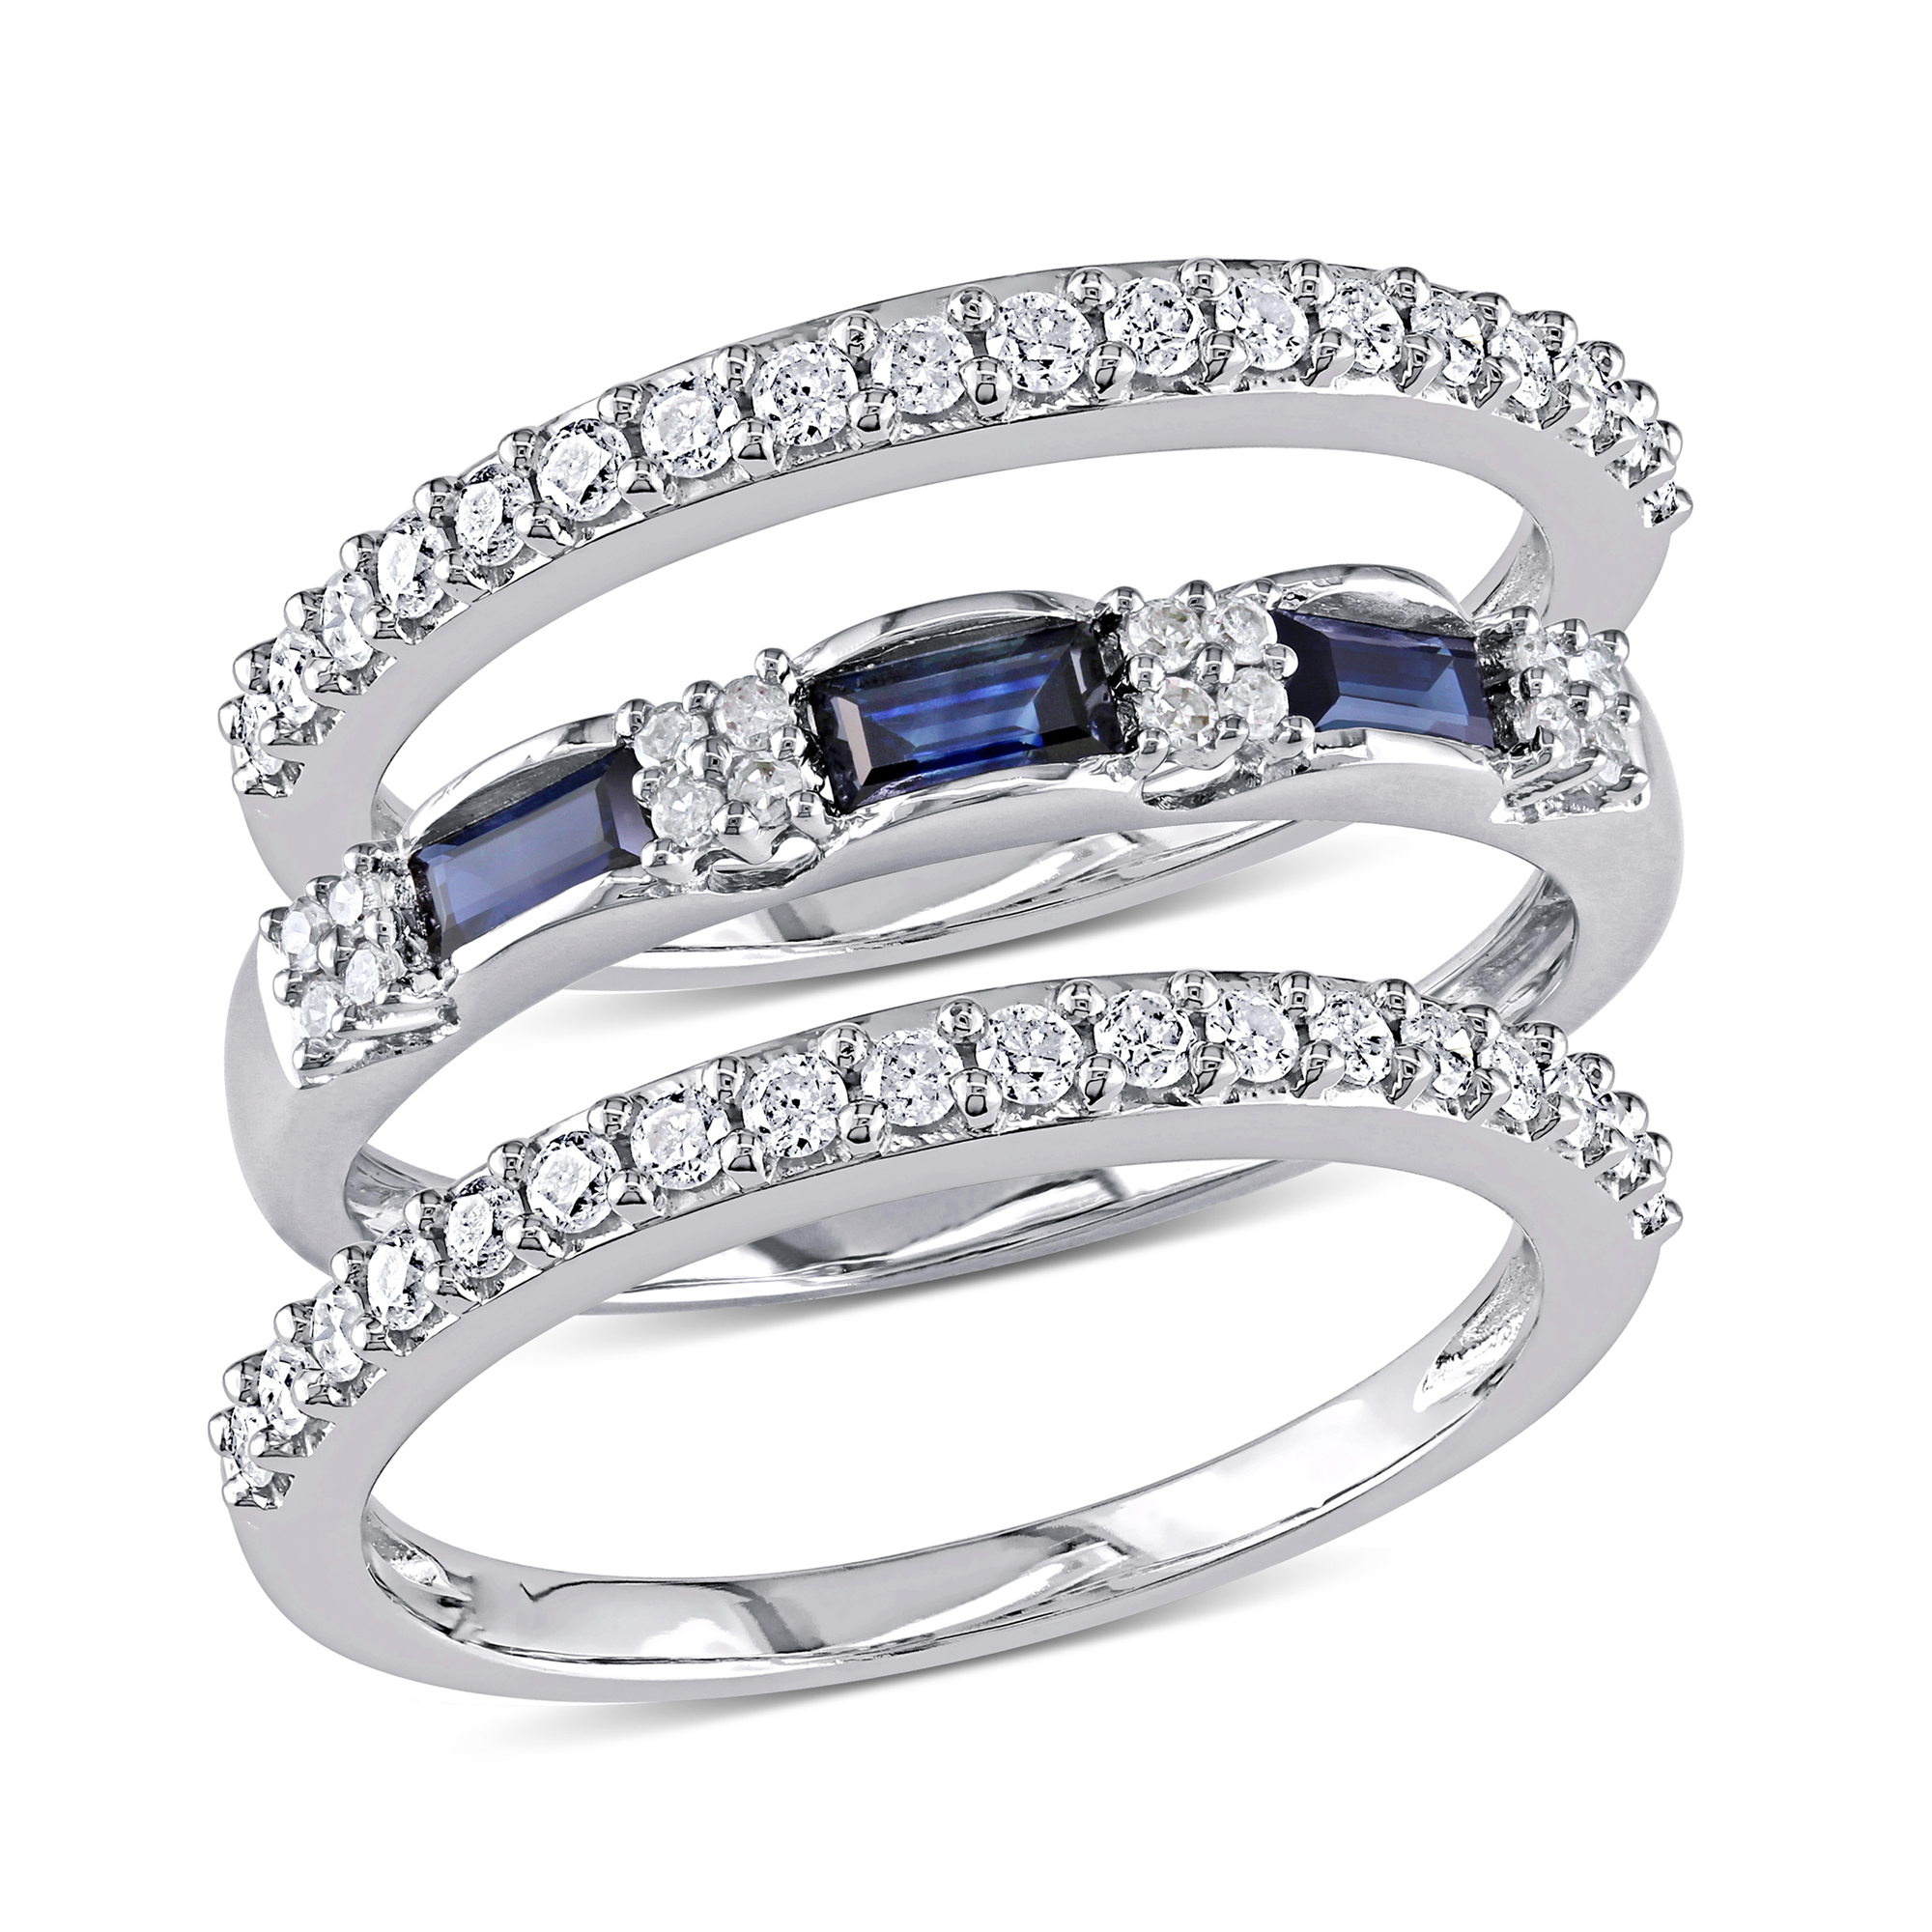 Blue Sapphire and 1/2ctw Diamond White Gold 3-Piece Stackable Ring Set | Size 8.5 -  REEDS, RDJ004796-0850